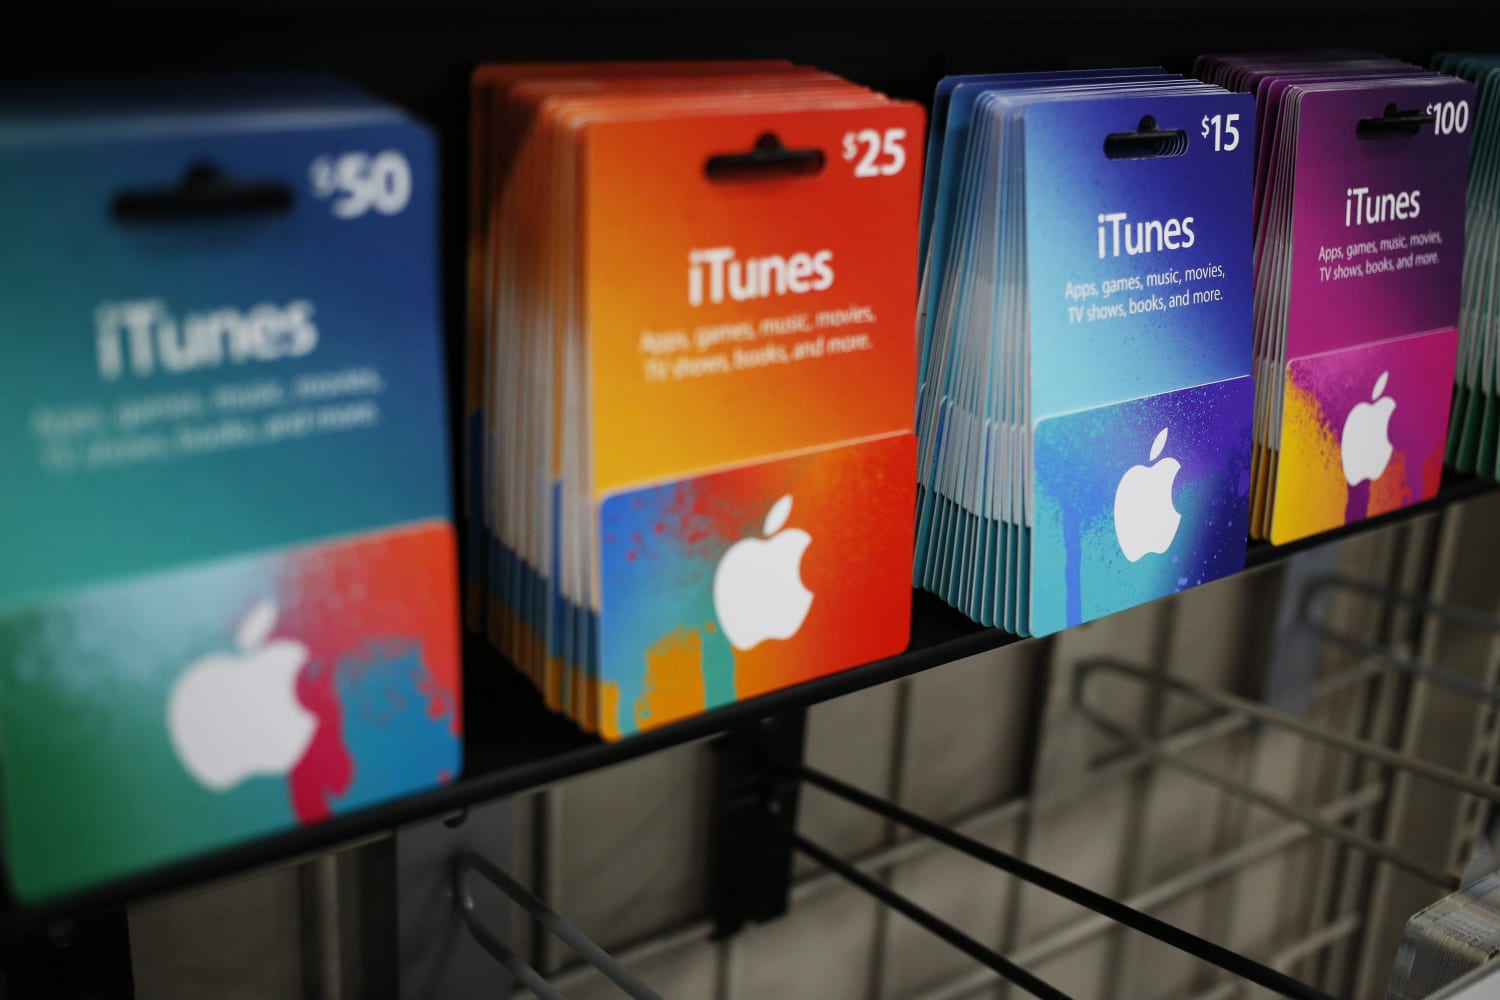 Where to Buy Apple Gift Cards in Stores 